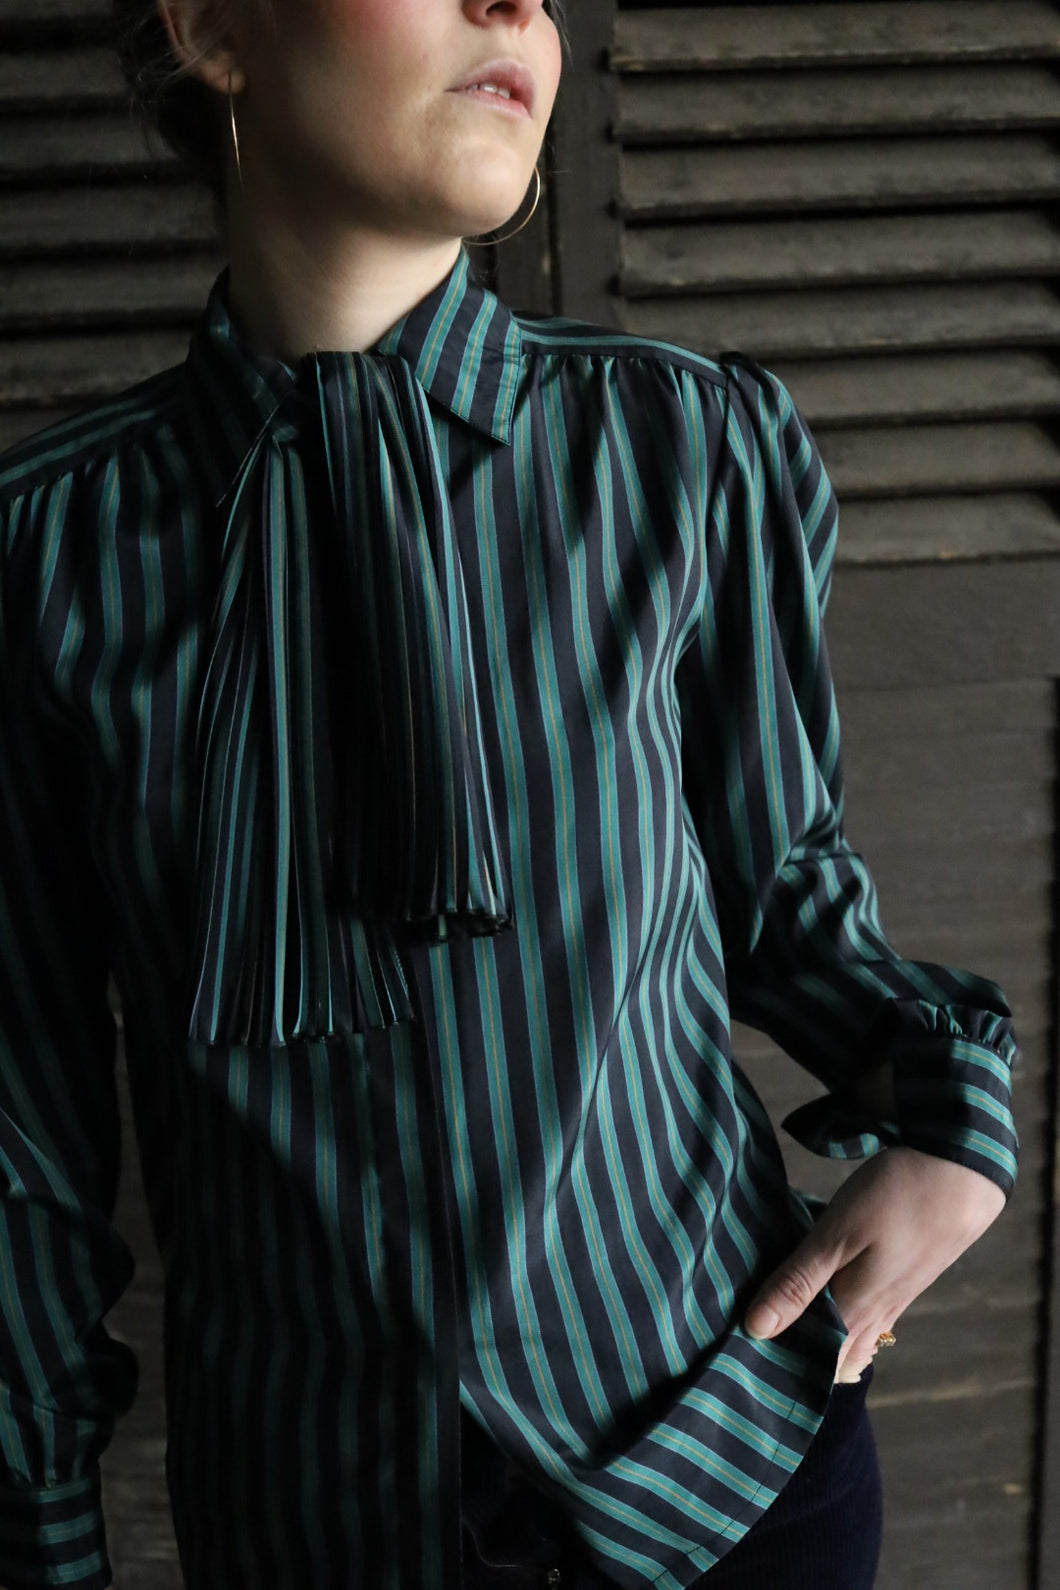 Fan Collar Ted Lapidus Blouse